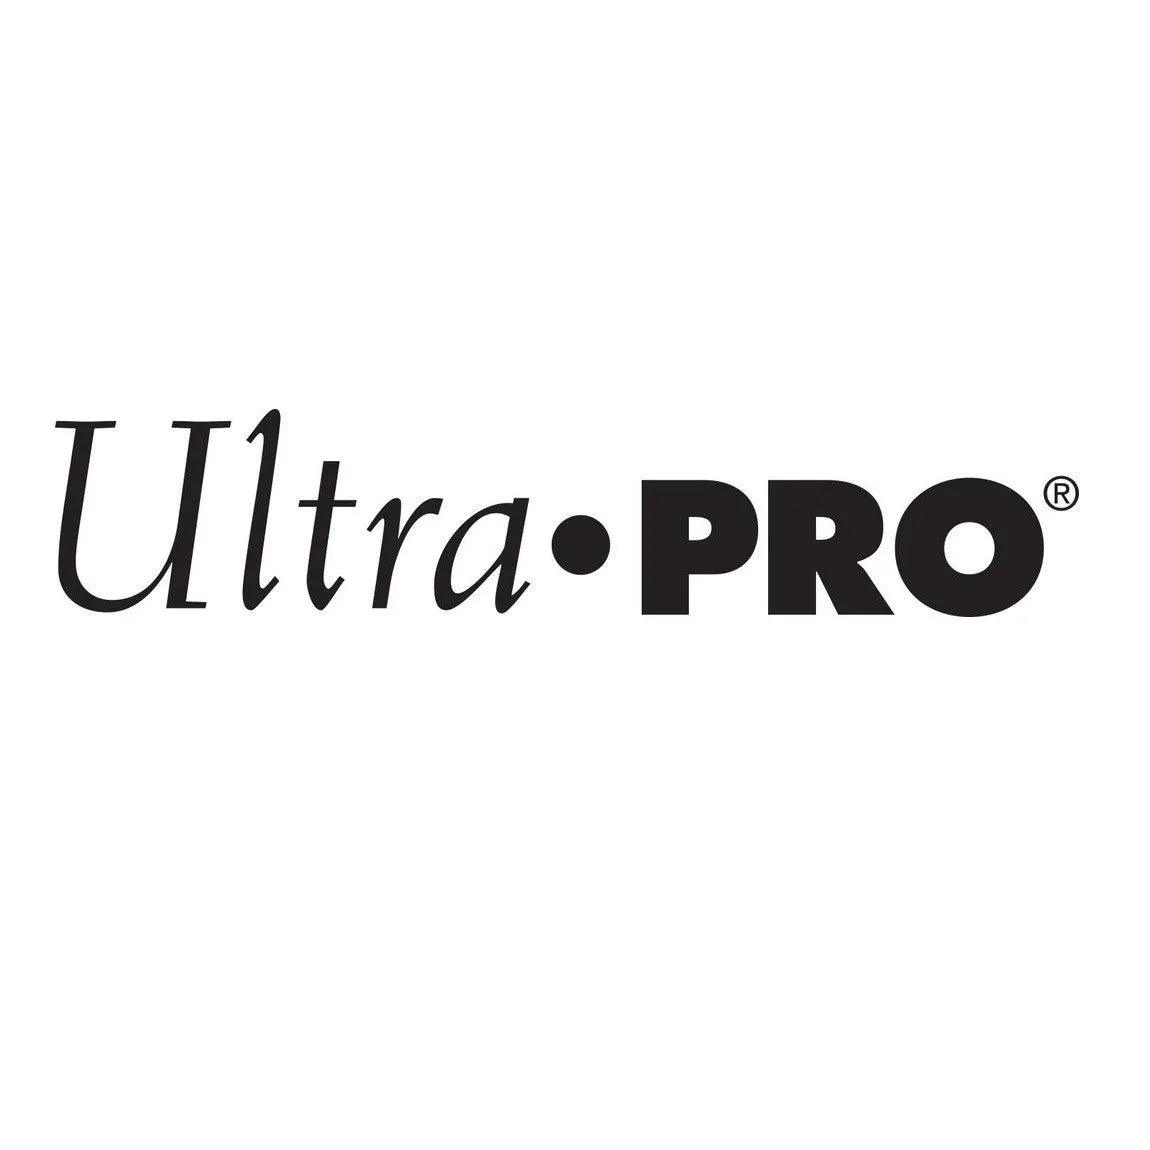 Ultra PRO - One-Touch 100pt - Hobby Champion Inc